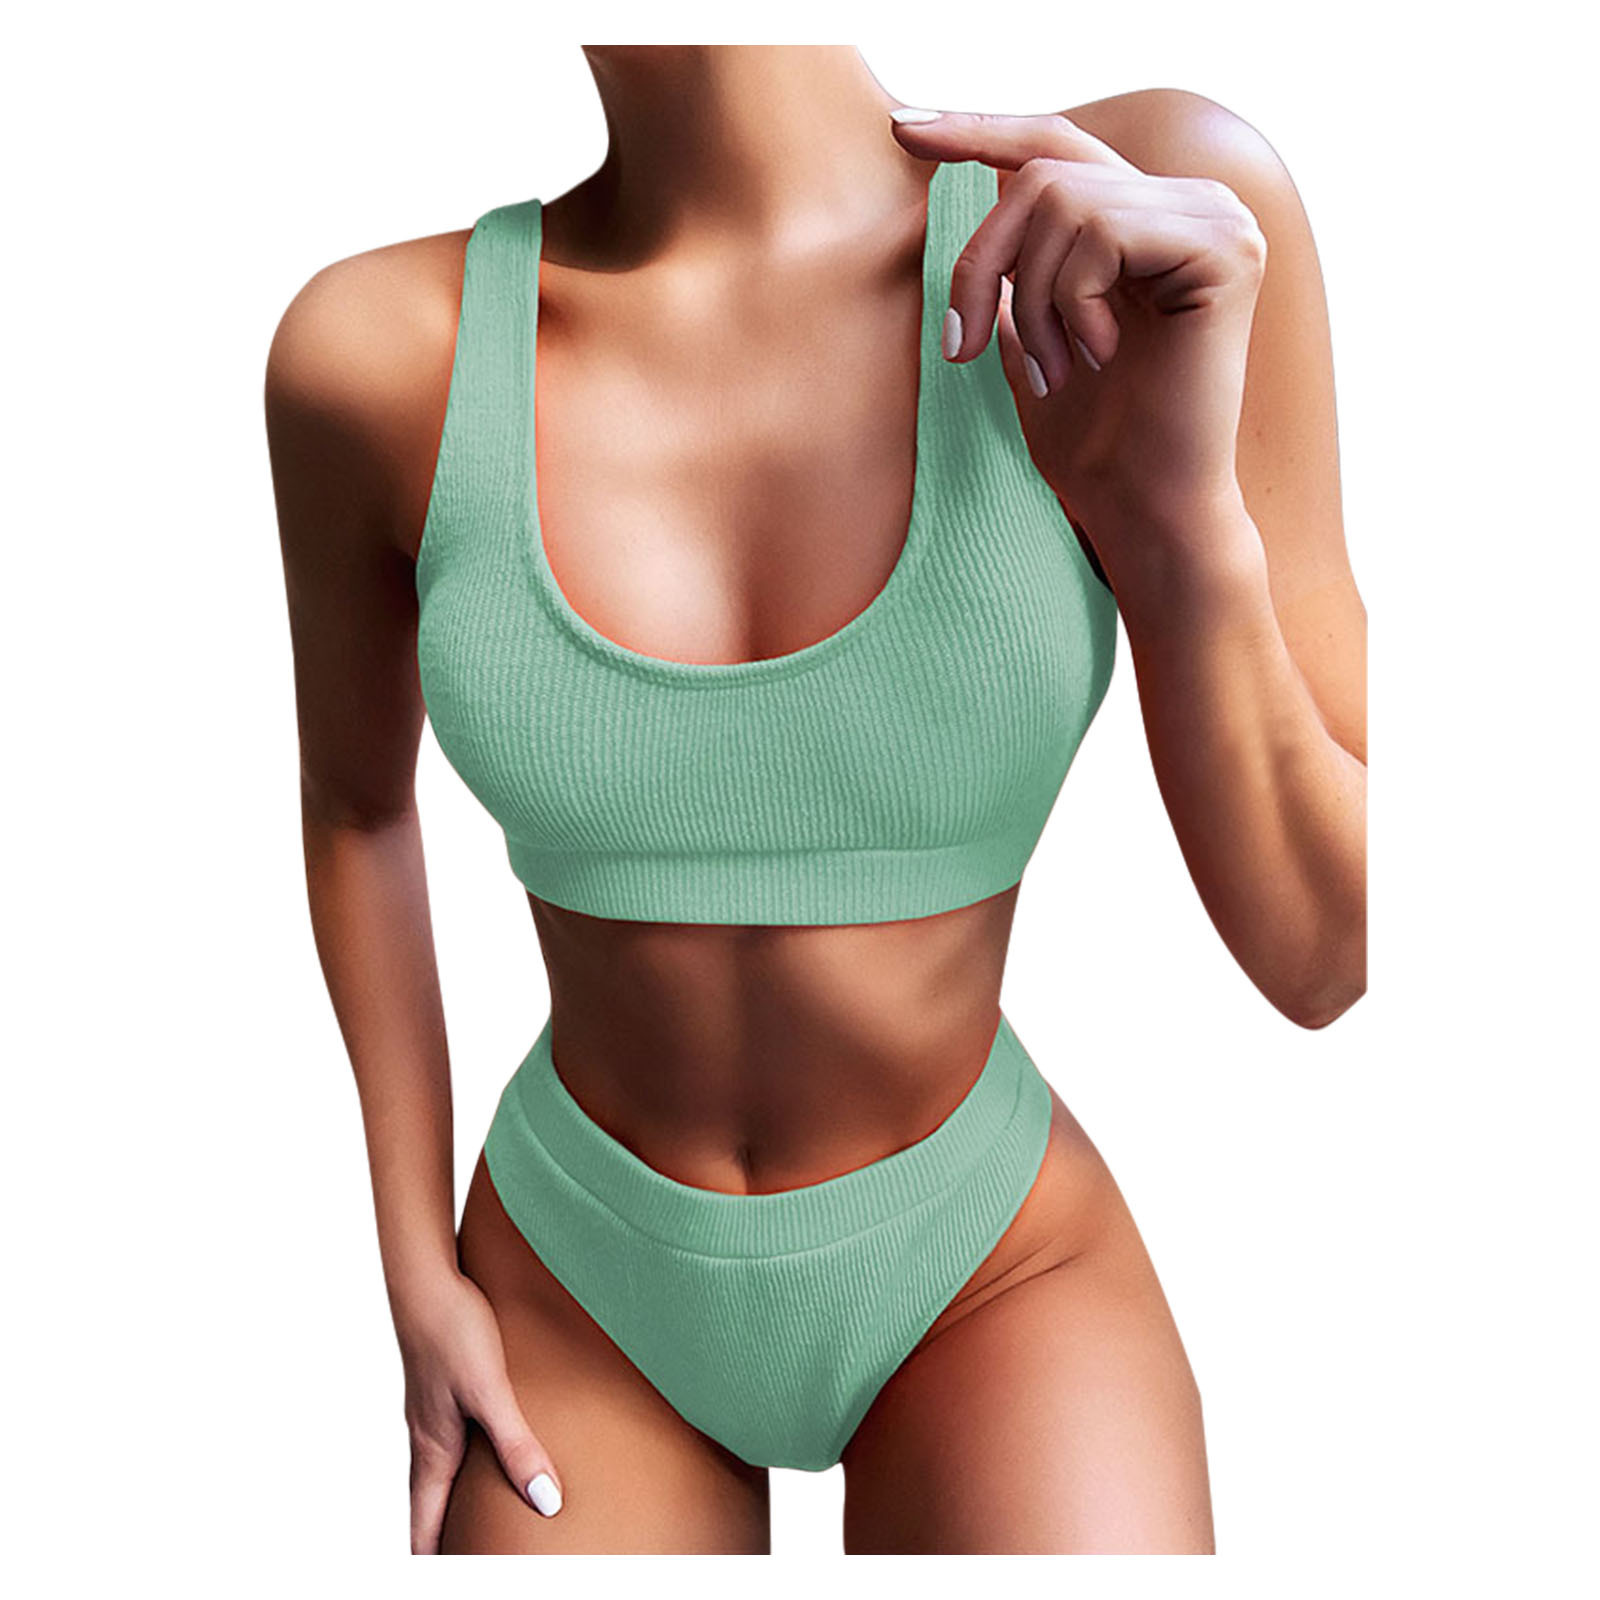 Yilin 2021 New European and American Ladies Sexy Solid Color Split Swimsuit AliExpress Bikinipicture3